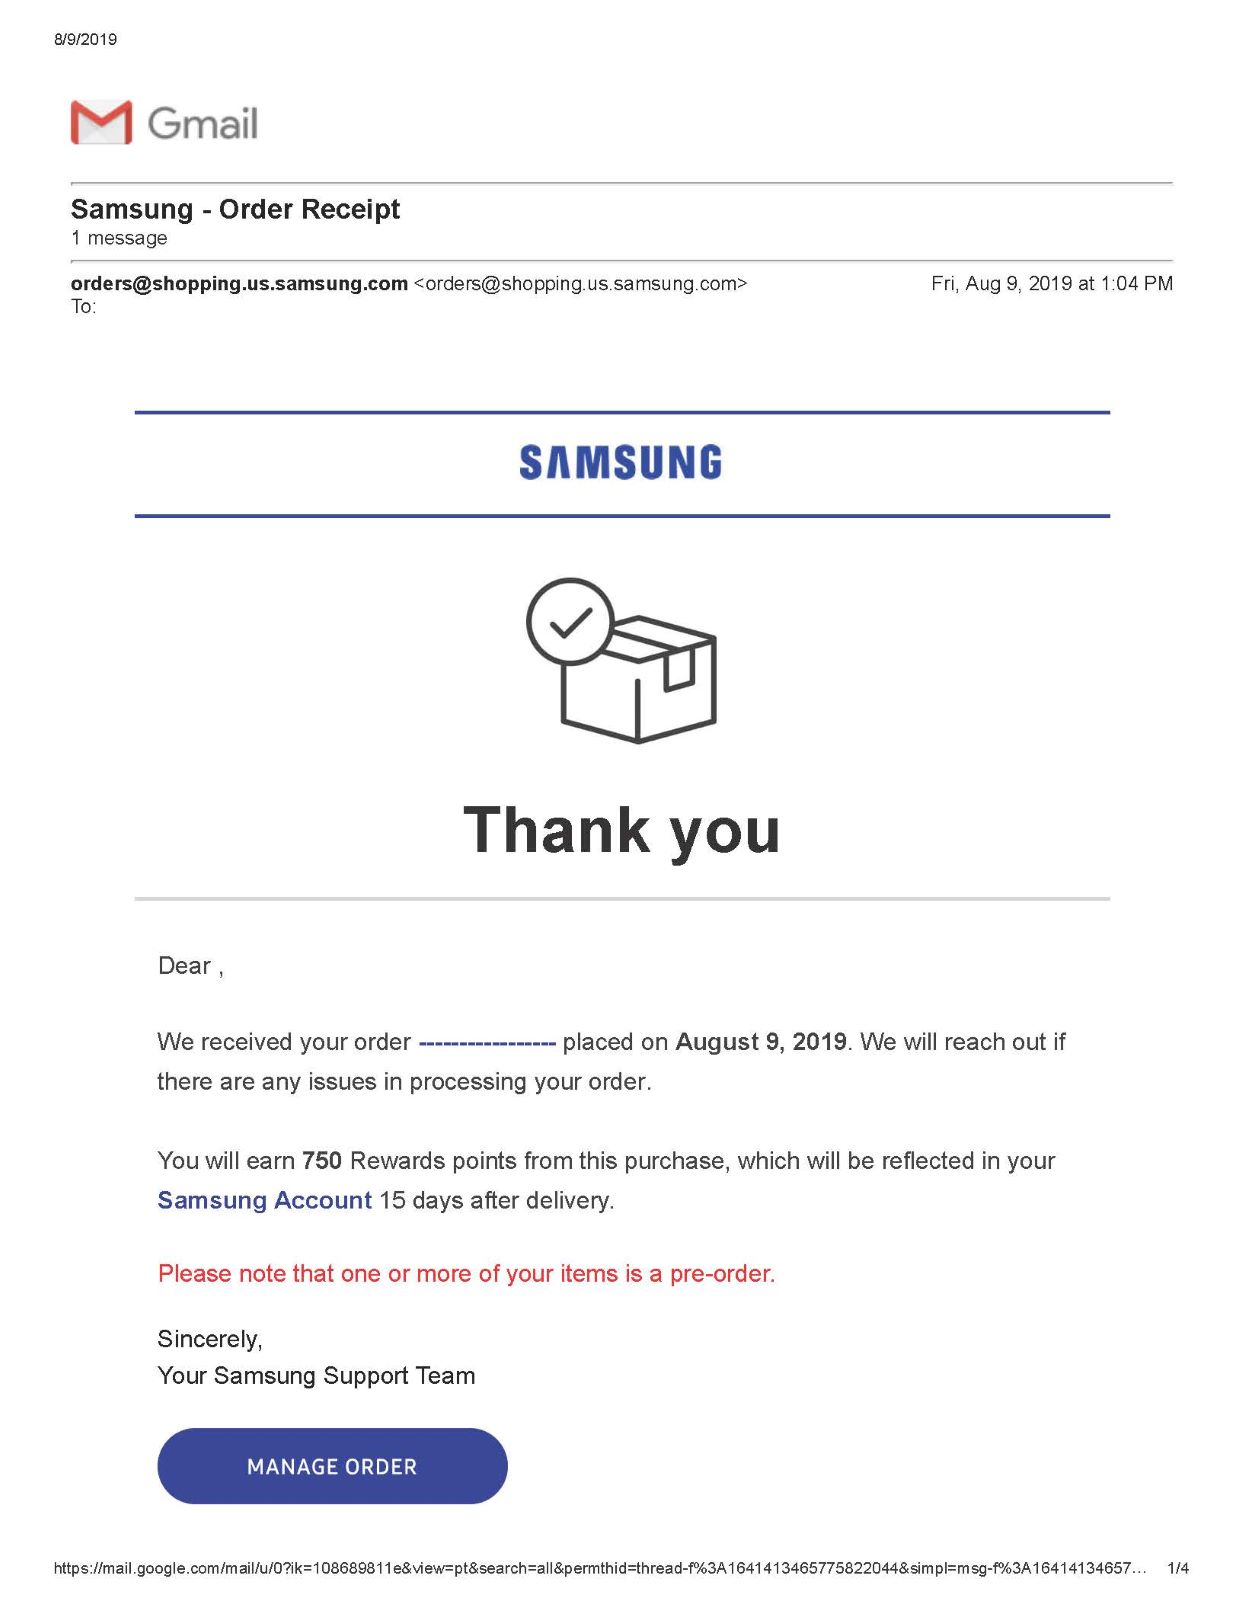 Gmail - Samsung - Order Receipt #D16PVPO042_Page_1.jpg